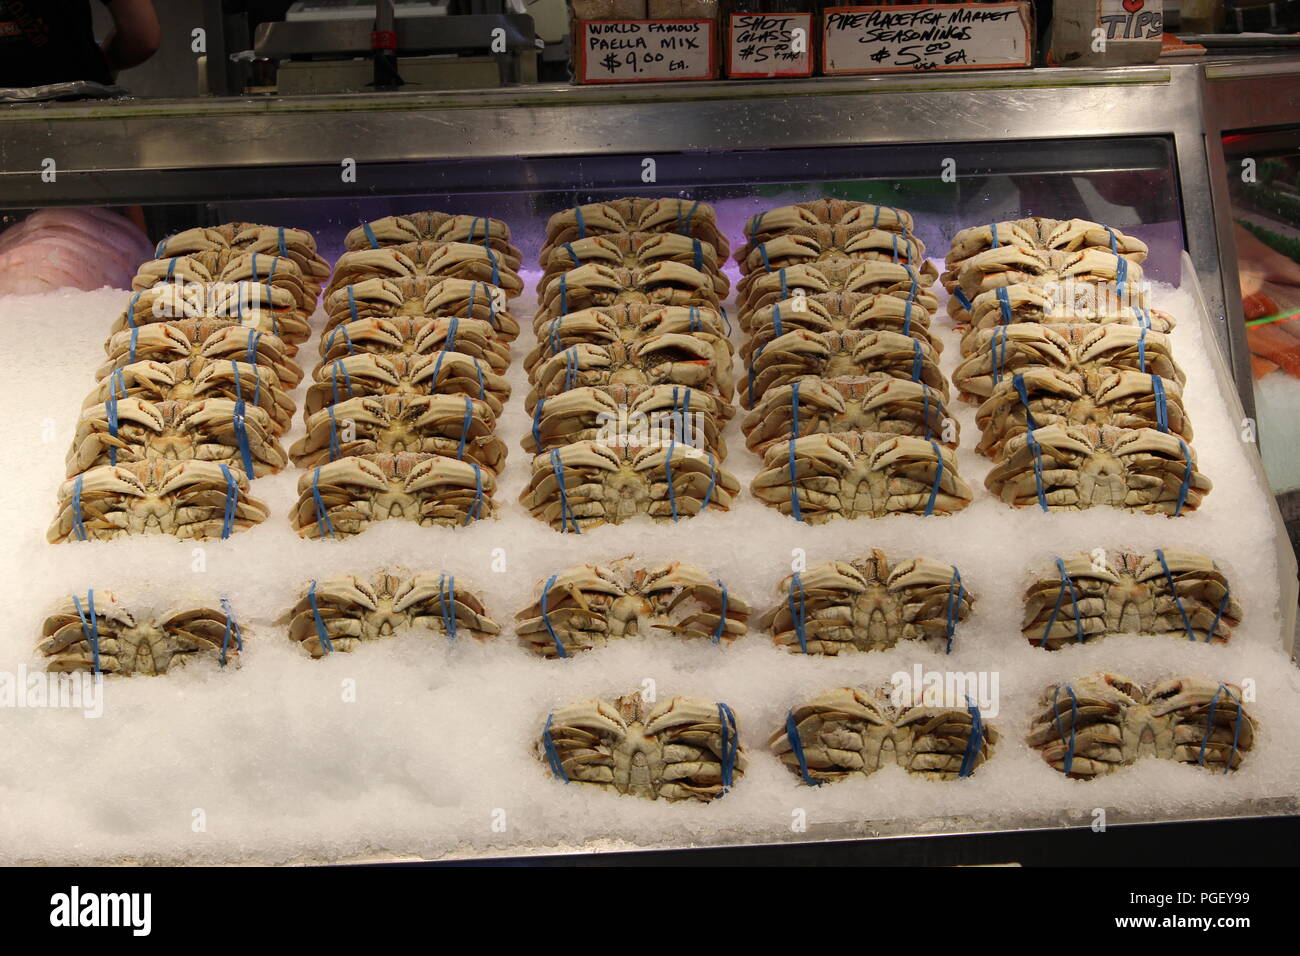 Meeresfrüchte angezeigt bei Pike Place Fish Co. am Pike Place Market in Seattle, Washington, USA Stockfoto